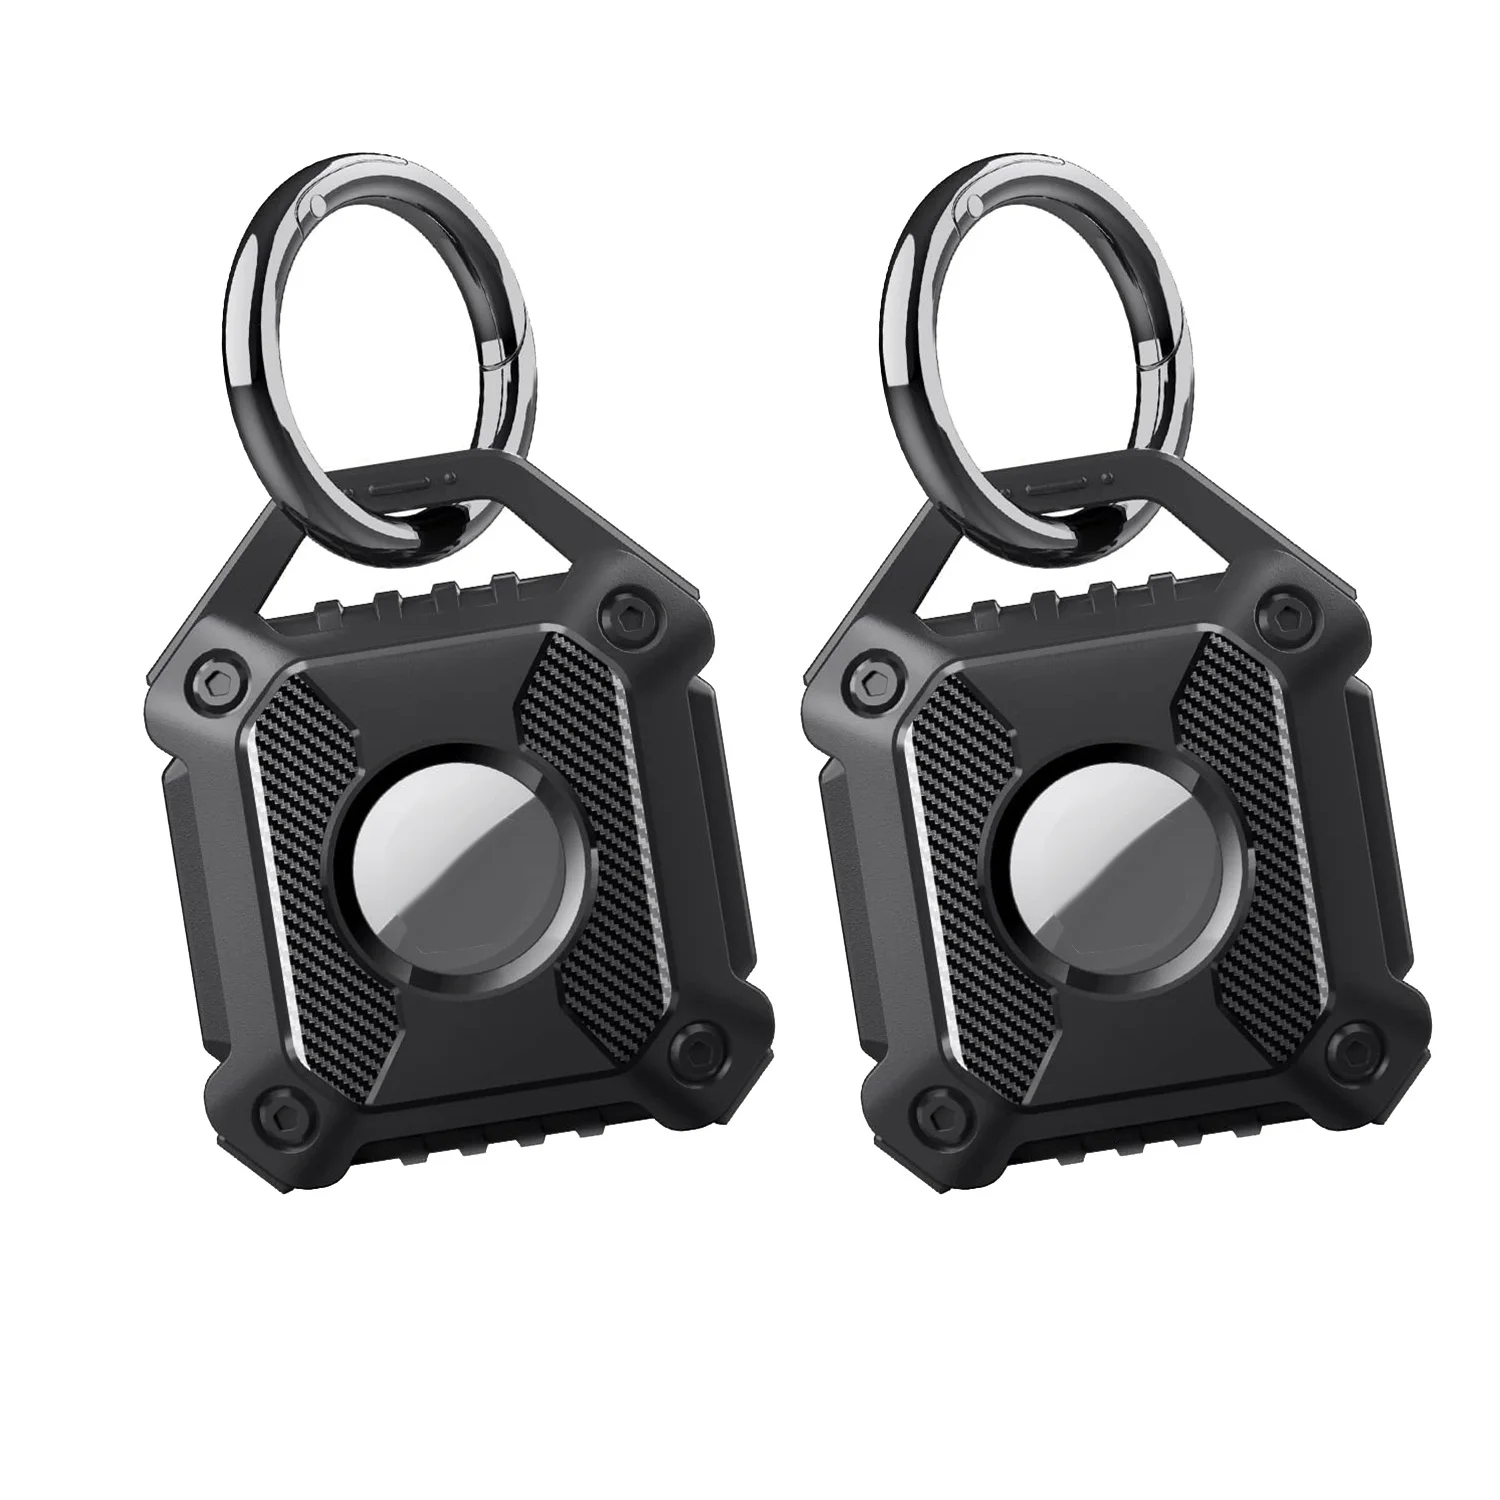 

2 Pack Waterproof Keychain Holder Case for Airtags ,Anti-Theft Protective Tracker Case with Key Ring for Luggage, Keys